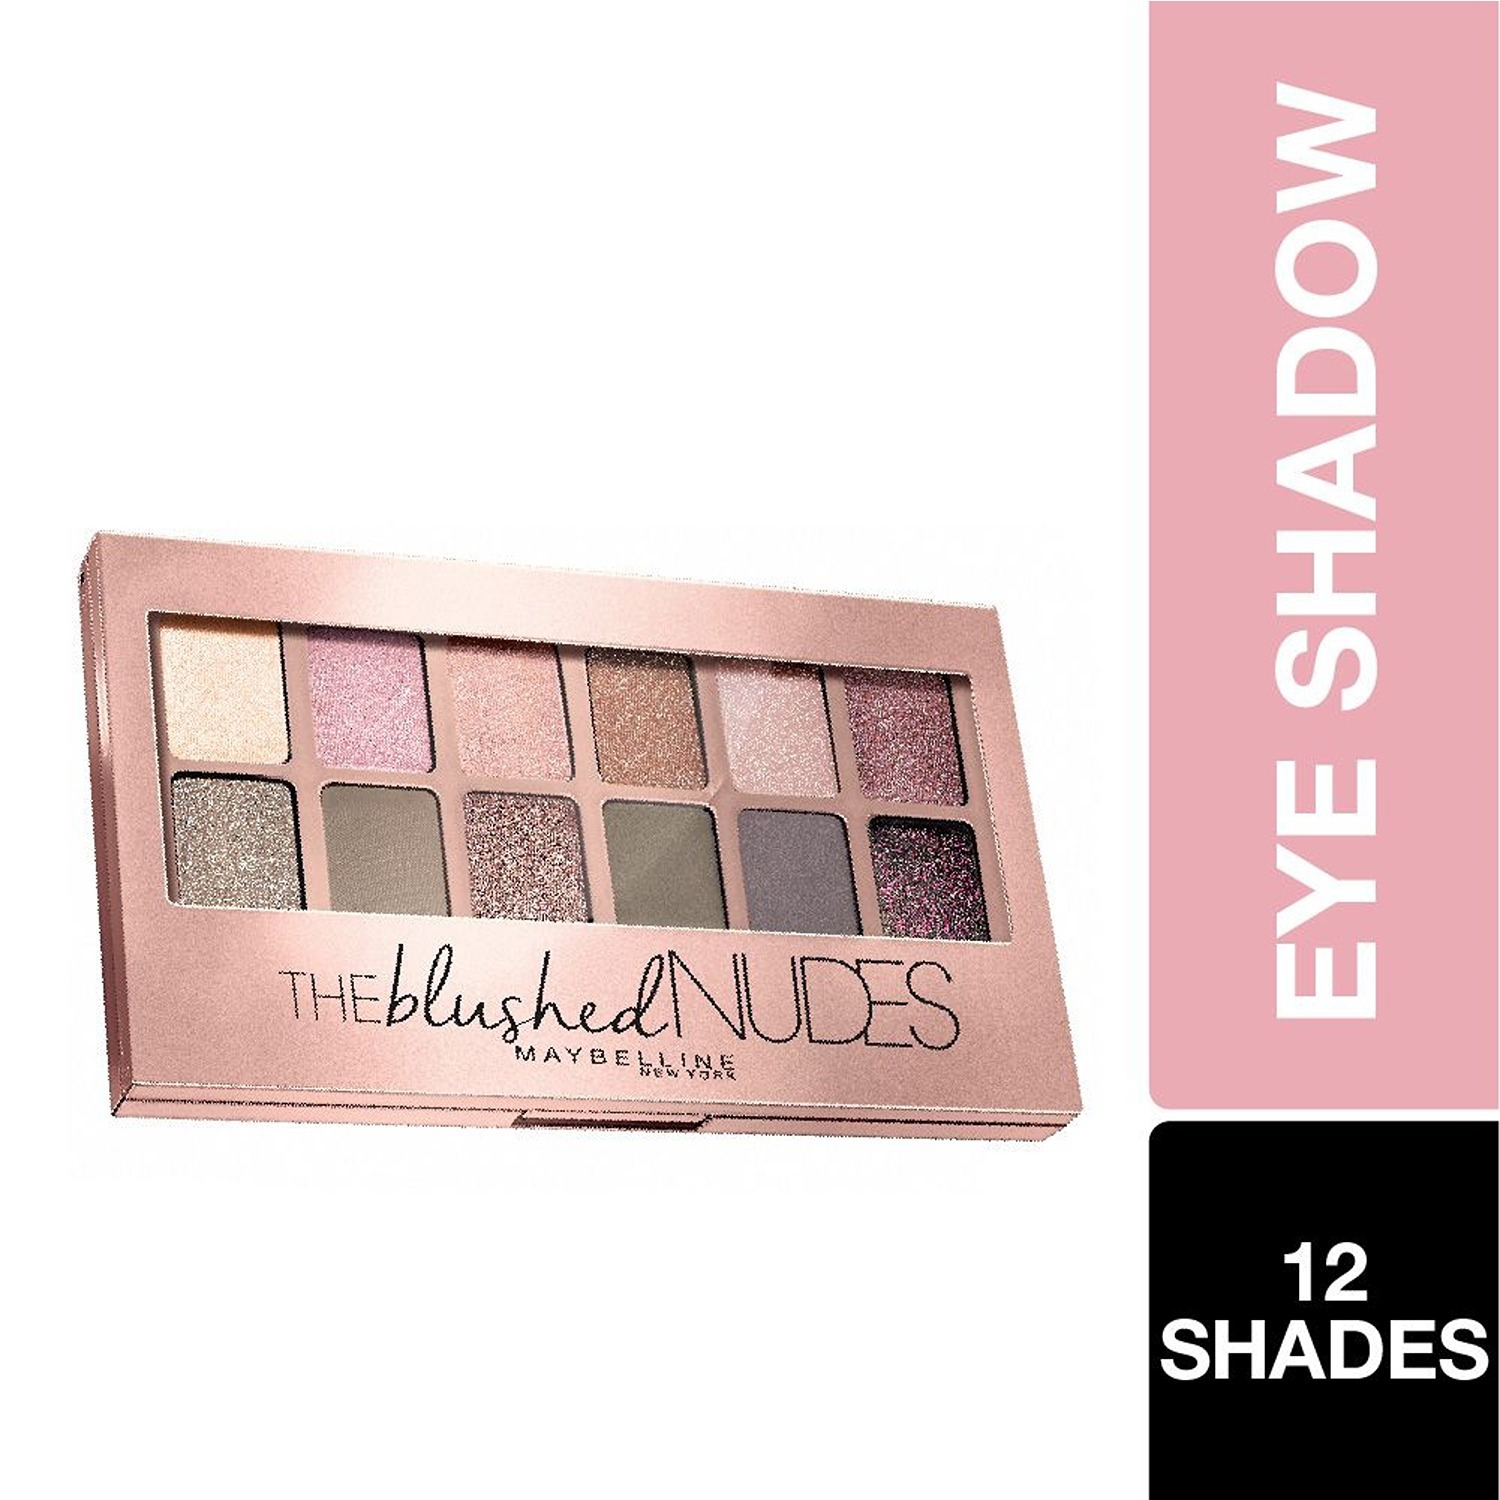 Maybelline New York | Maybelline New York The Blushed Nudes Eye Shadow Palette - Multi-Color (9g)